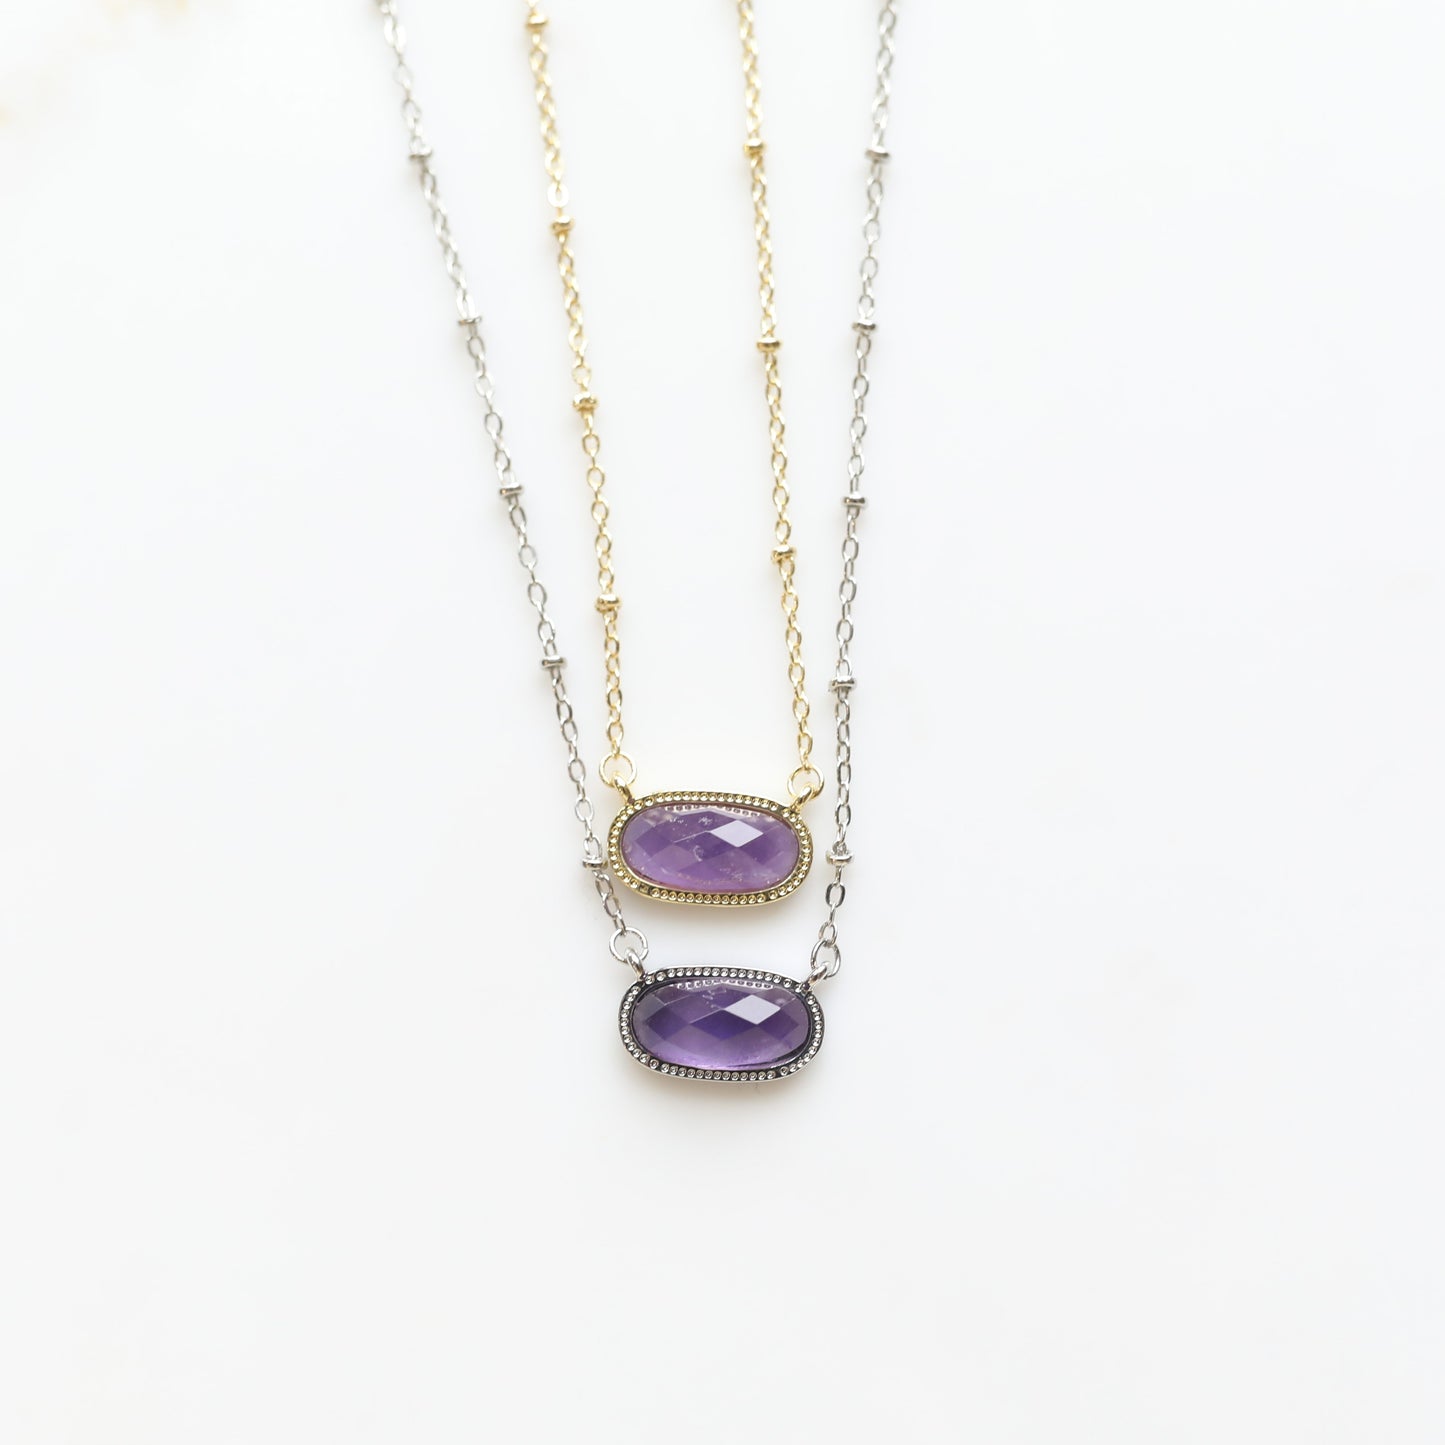 Meaningful Gemstone Necklace in Amethyst Dark available with a Gold or Silver chain